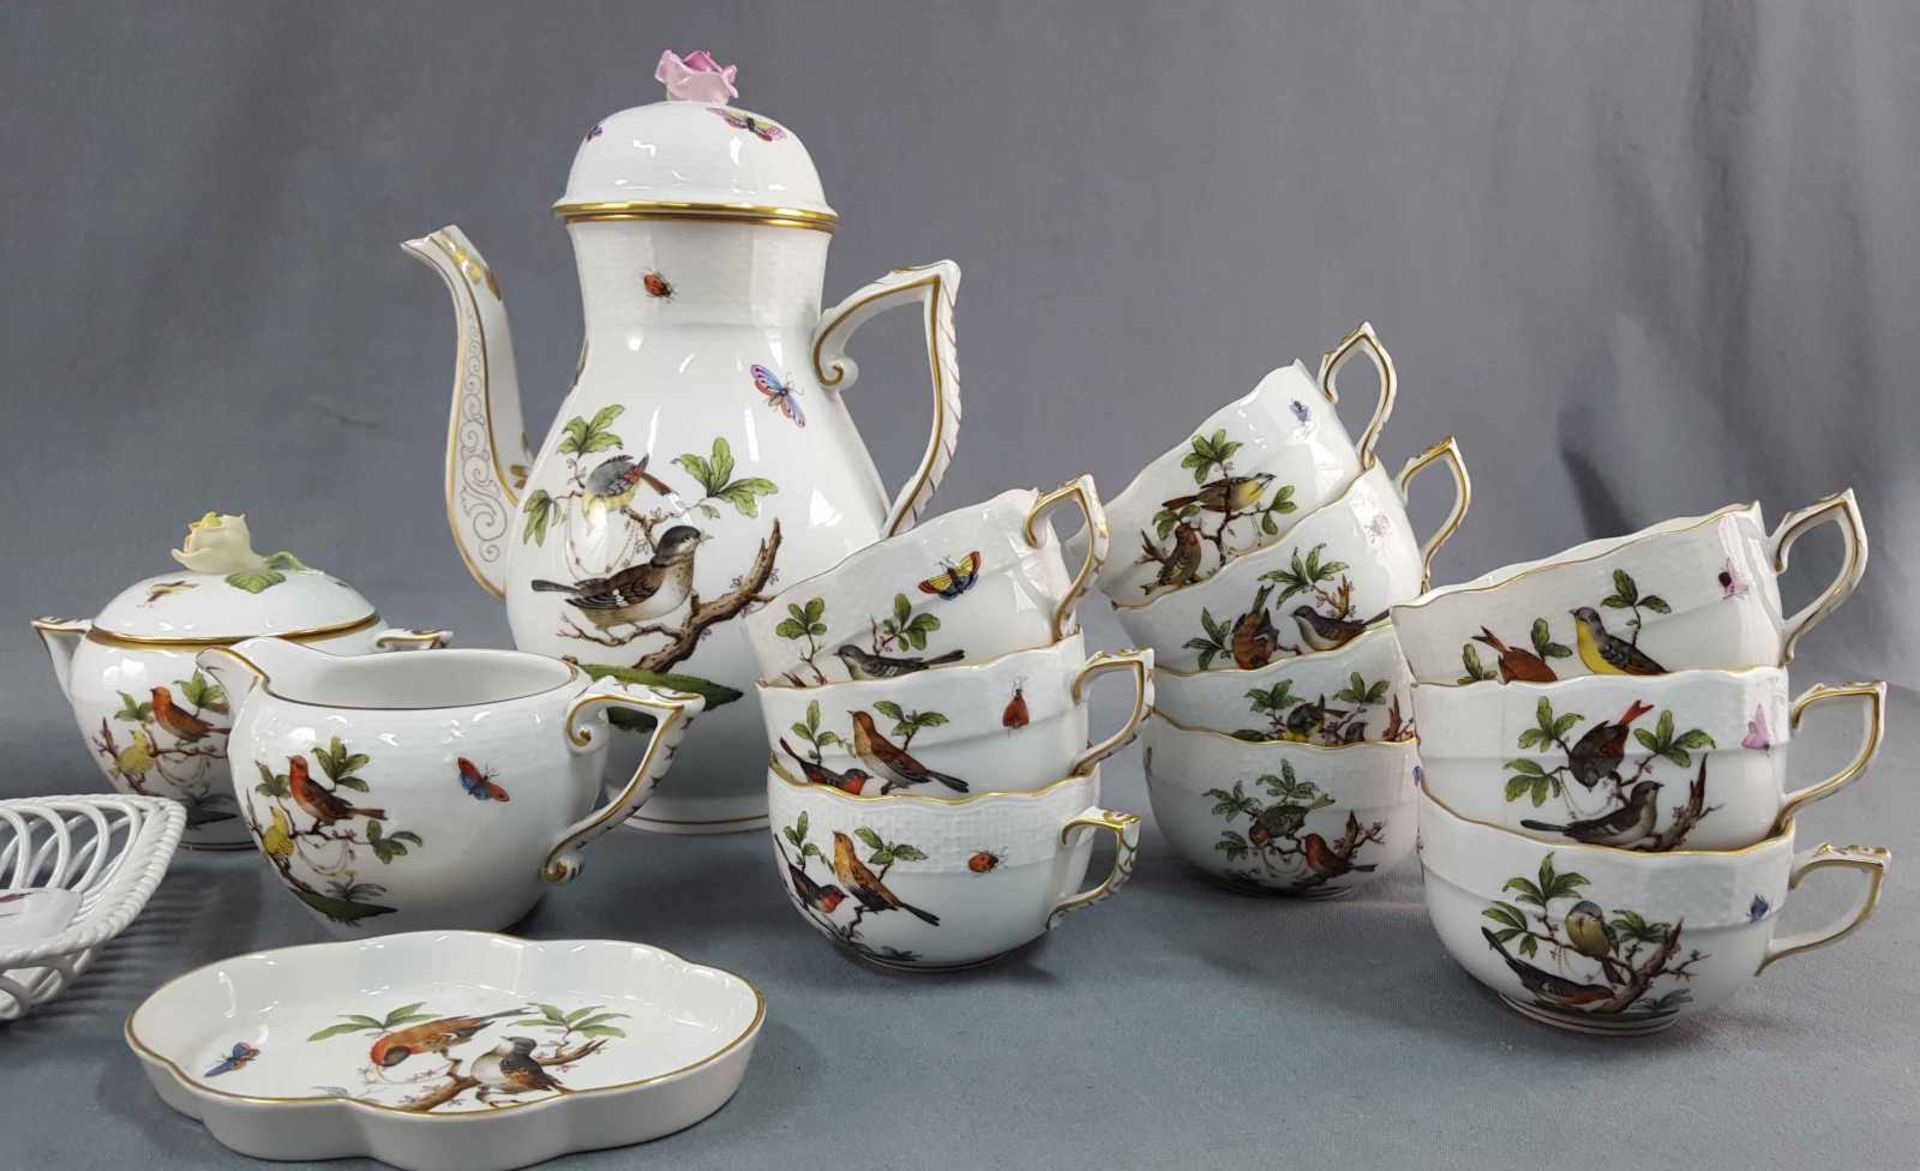 Herend Porcelain. Coffee service for at least 9 people. - Image 4 of 9